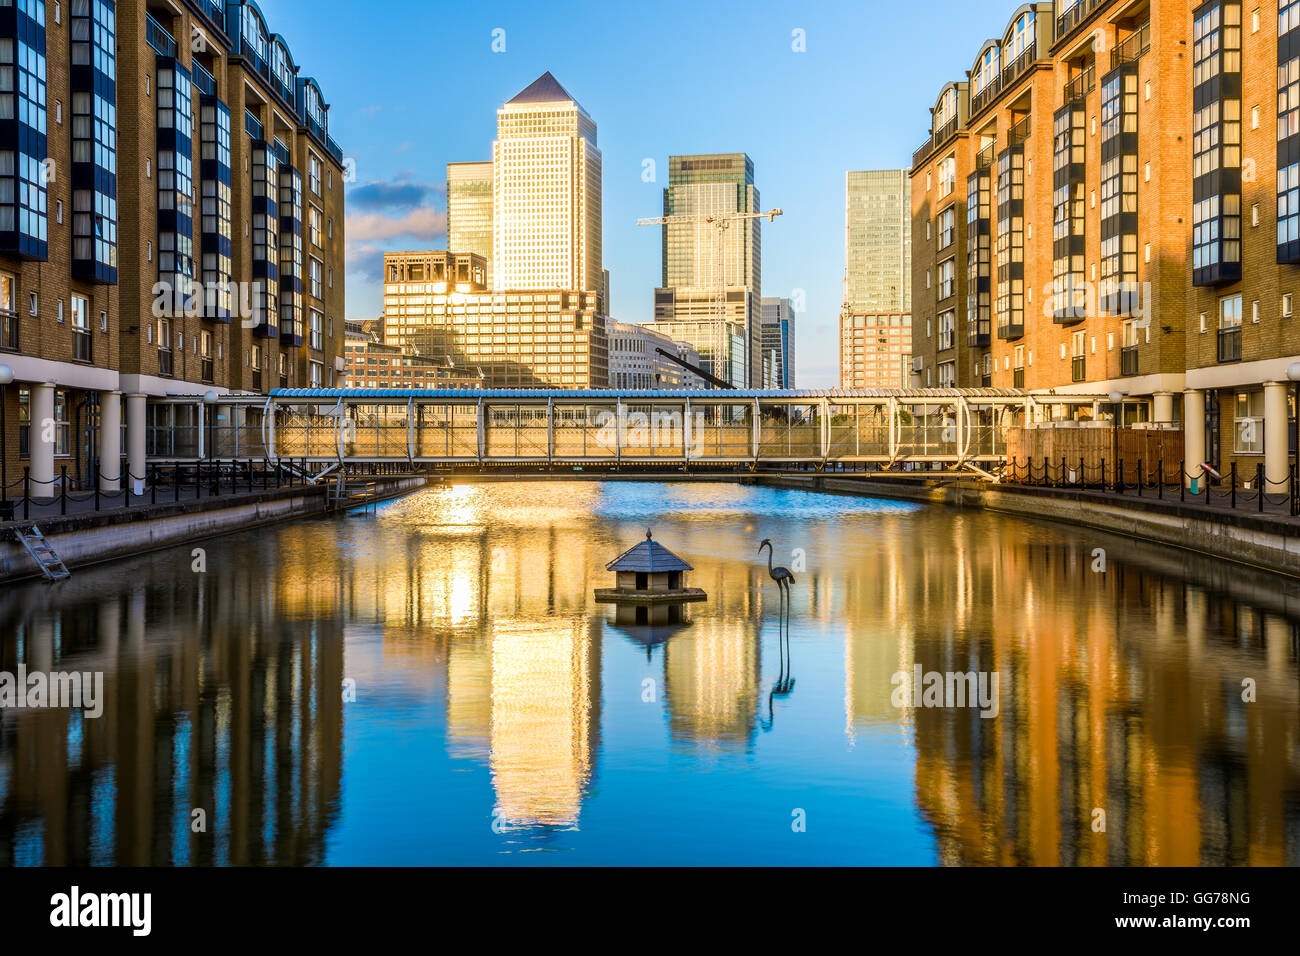 Canary Wharf, financial hub in London at sunset seen from Nelson Dock Pier Stock Photo